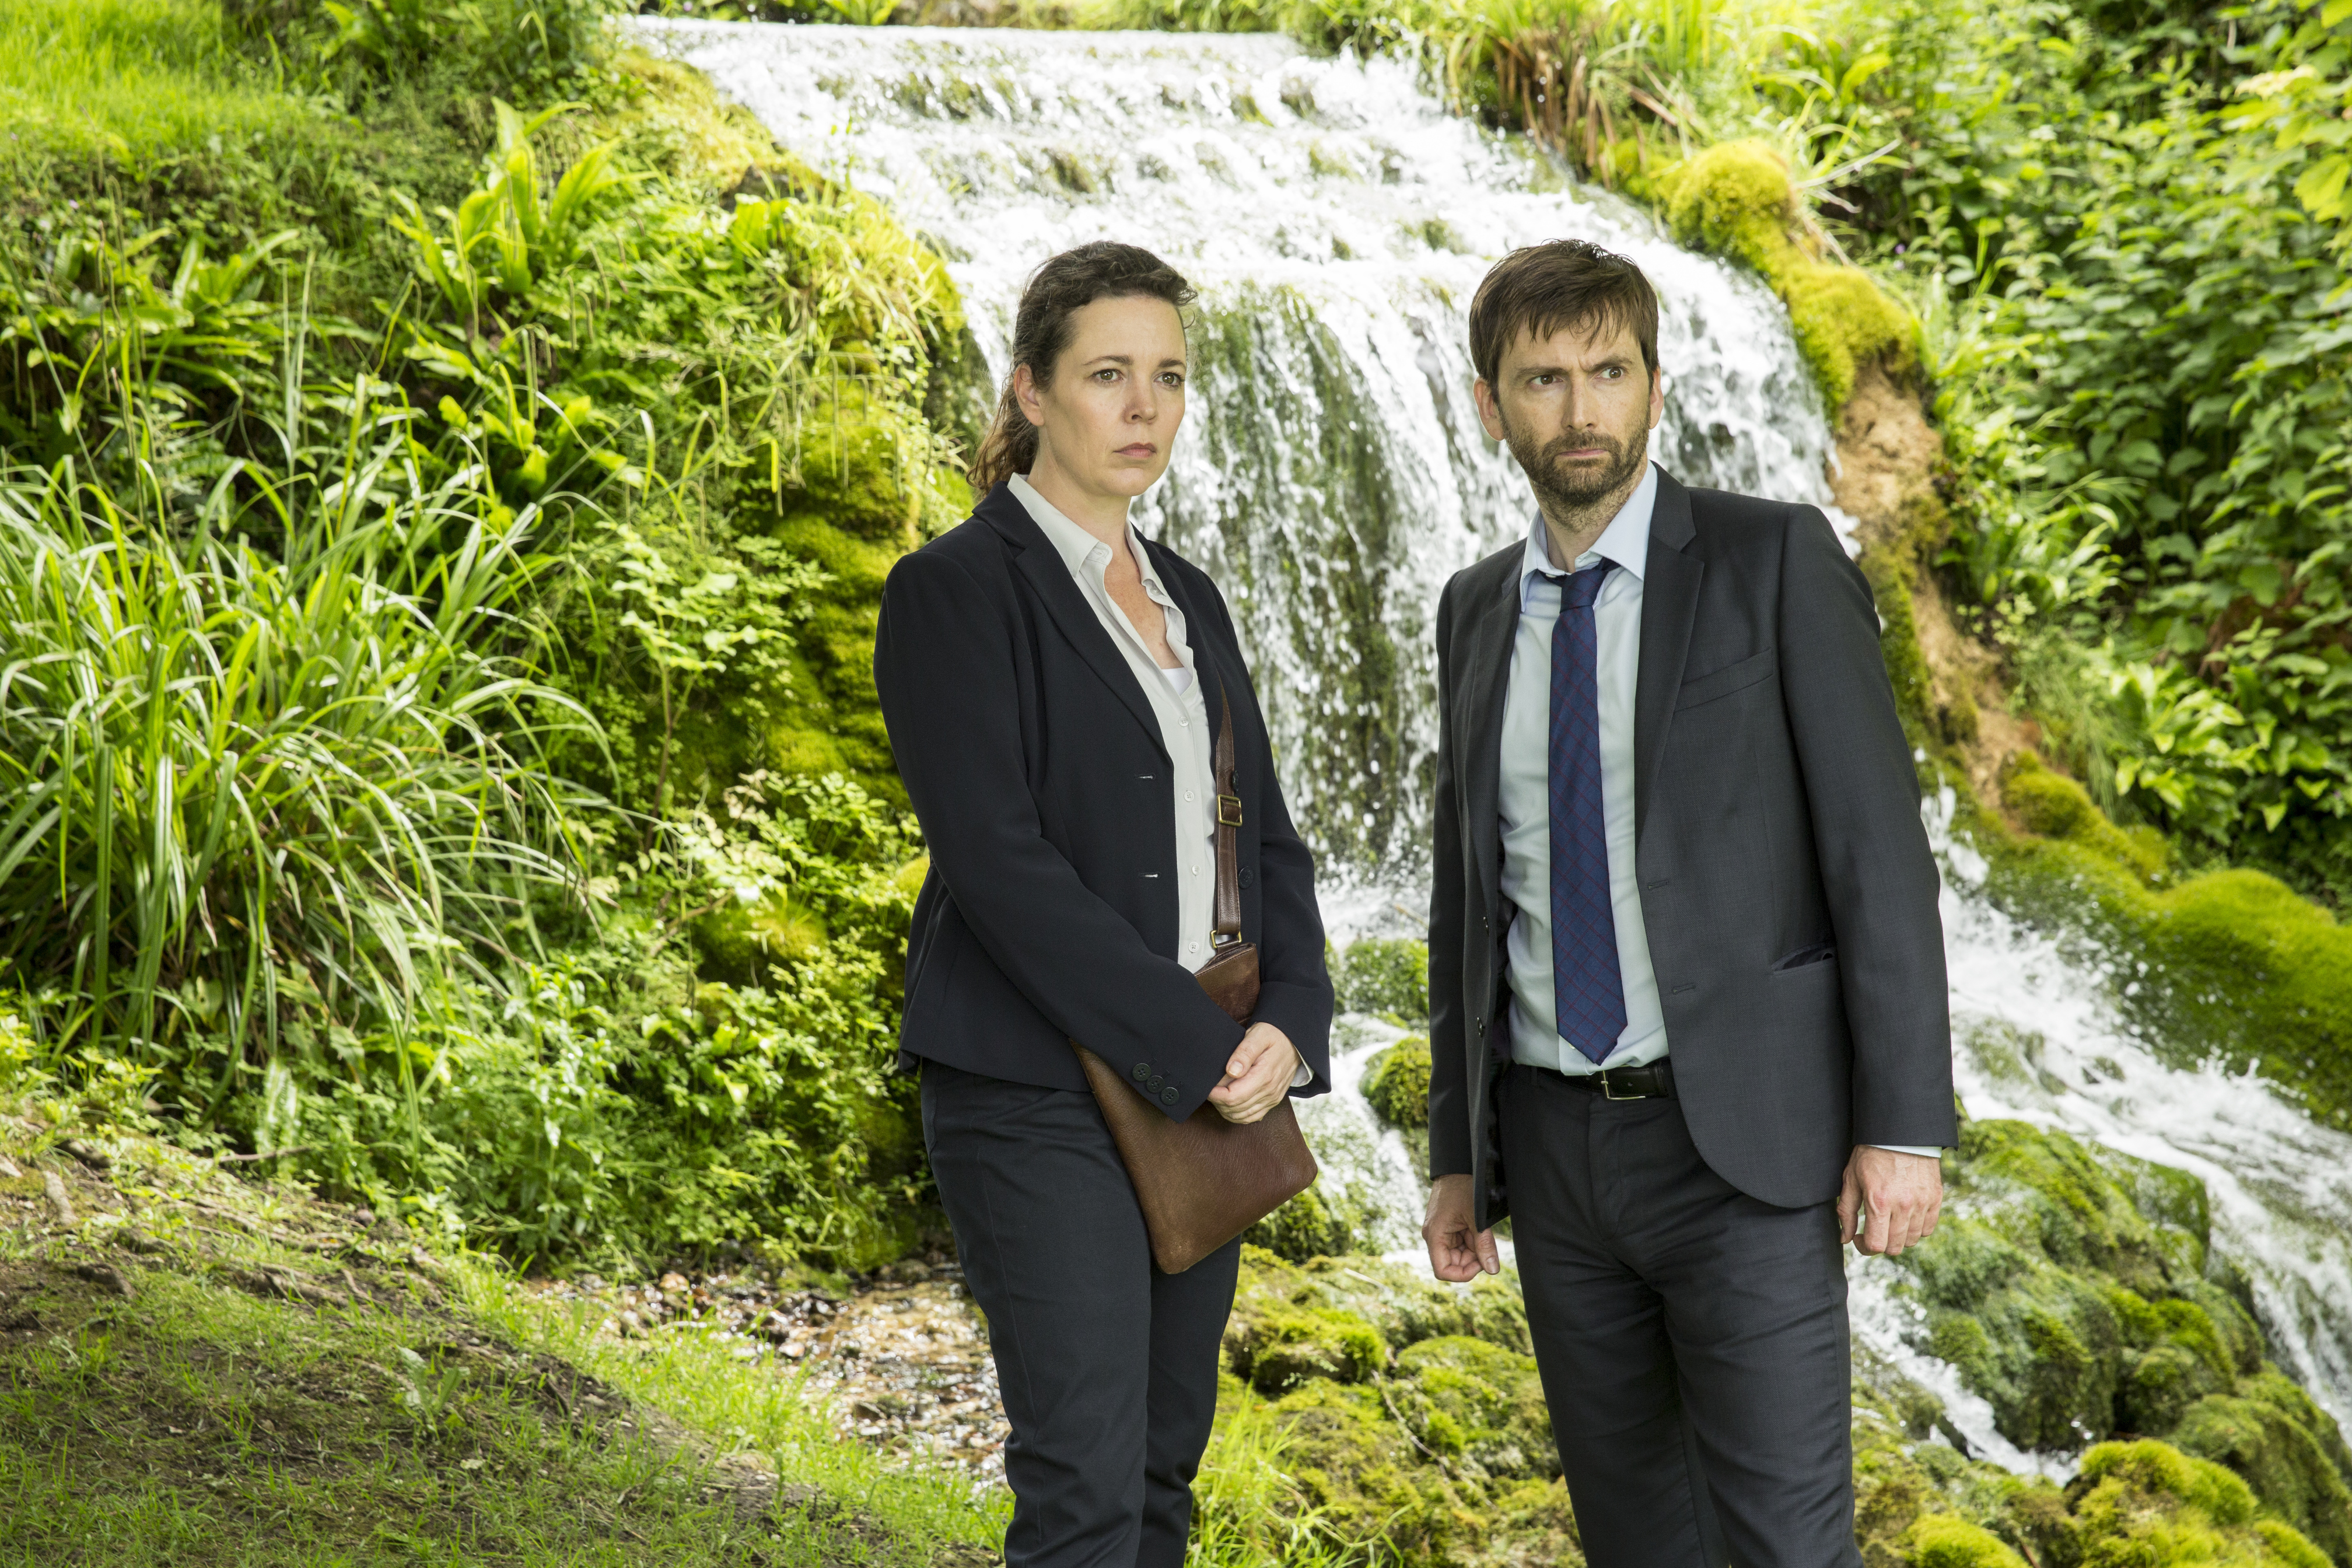 Broadchurch On Bbc America Cancelled Or Season 4 Release Date